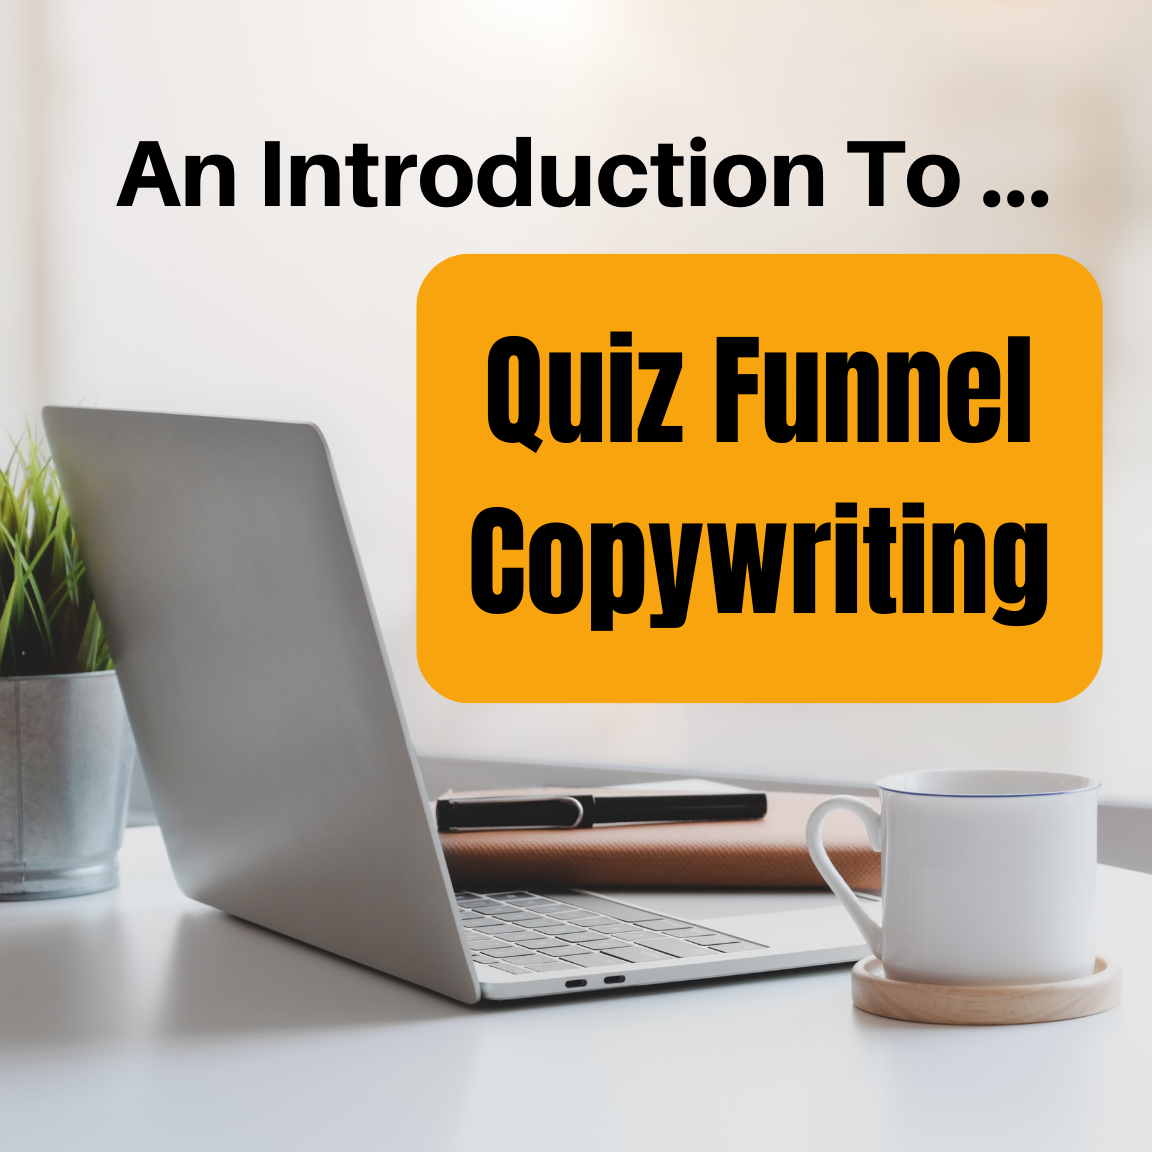 Image shows a laptop, notebook and pen, plant and coffee mug with the words "Introduction To Quiz Funnel Copywriting"